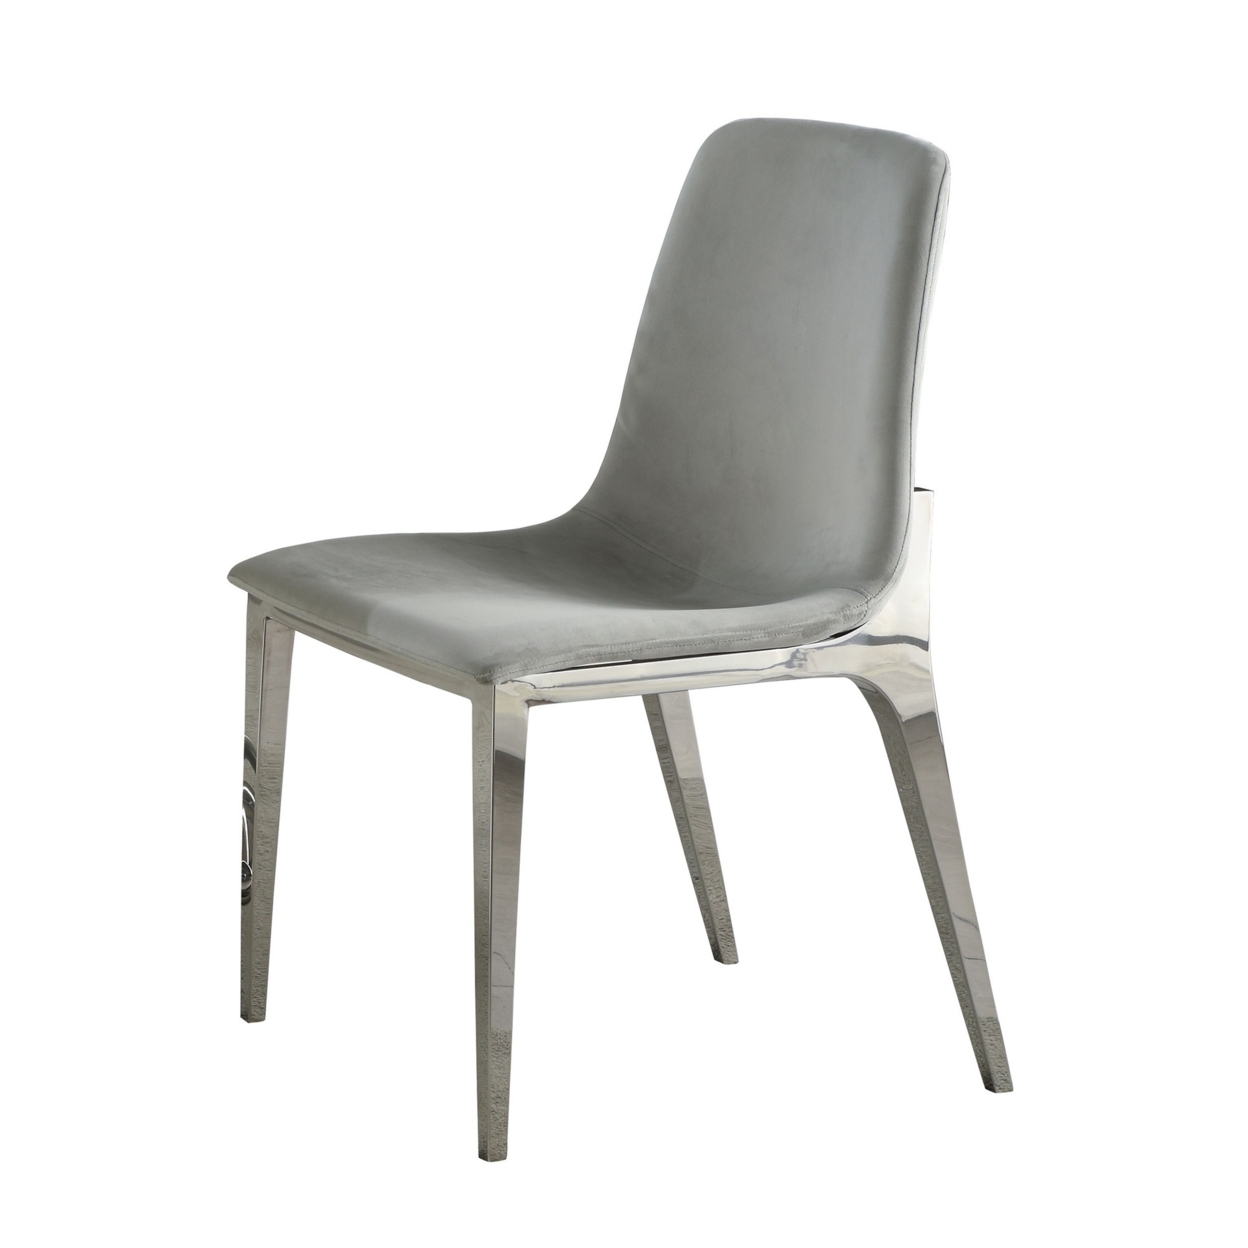 Dining Chair With Bucket Seat And Metal Legs, Set Of 4, Gray- Saltoro Sherpi